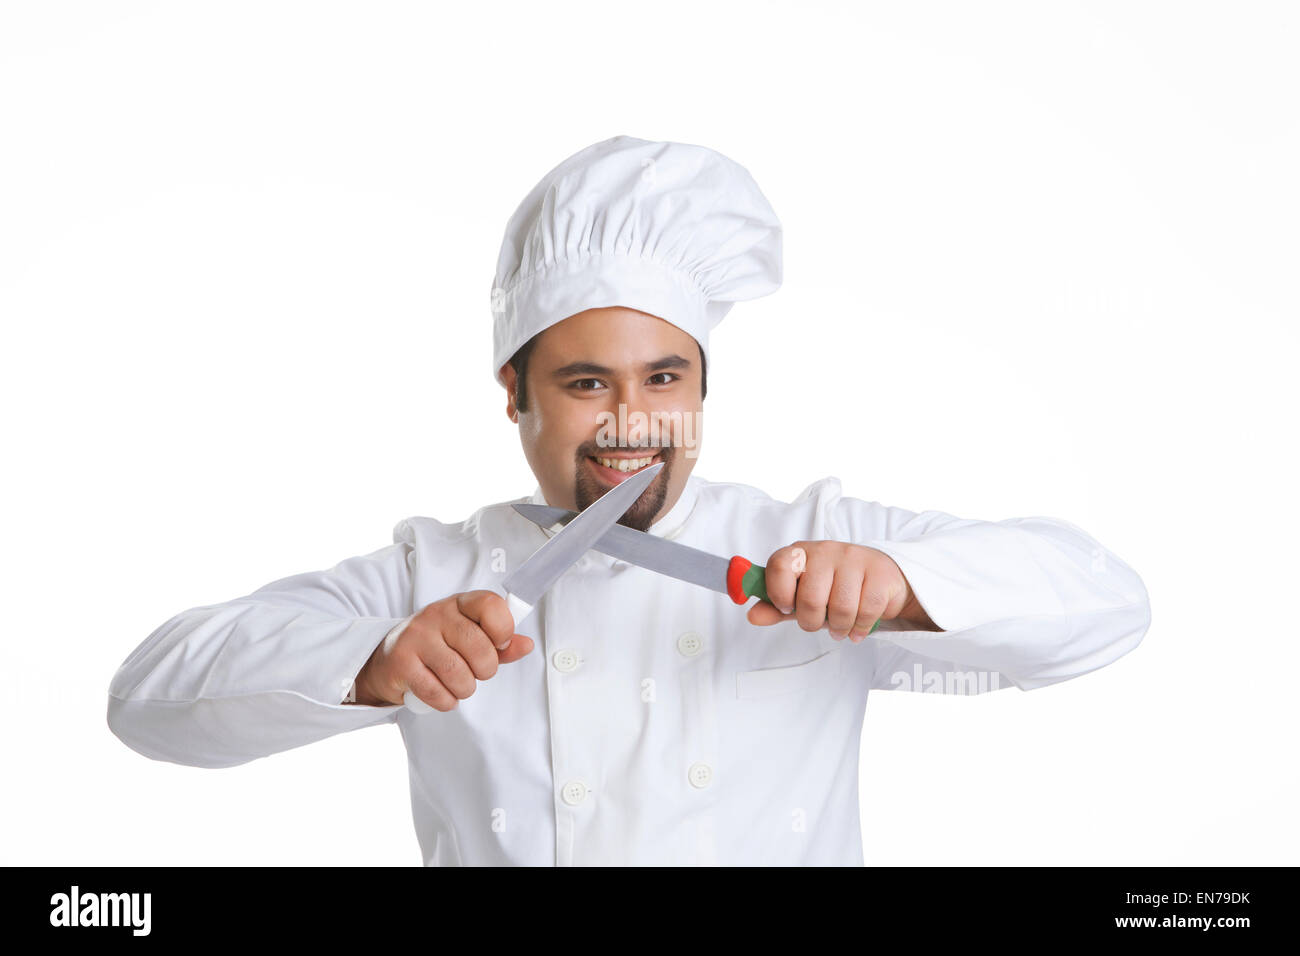 Portrait of chef sharpening knives Stock Photo